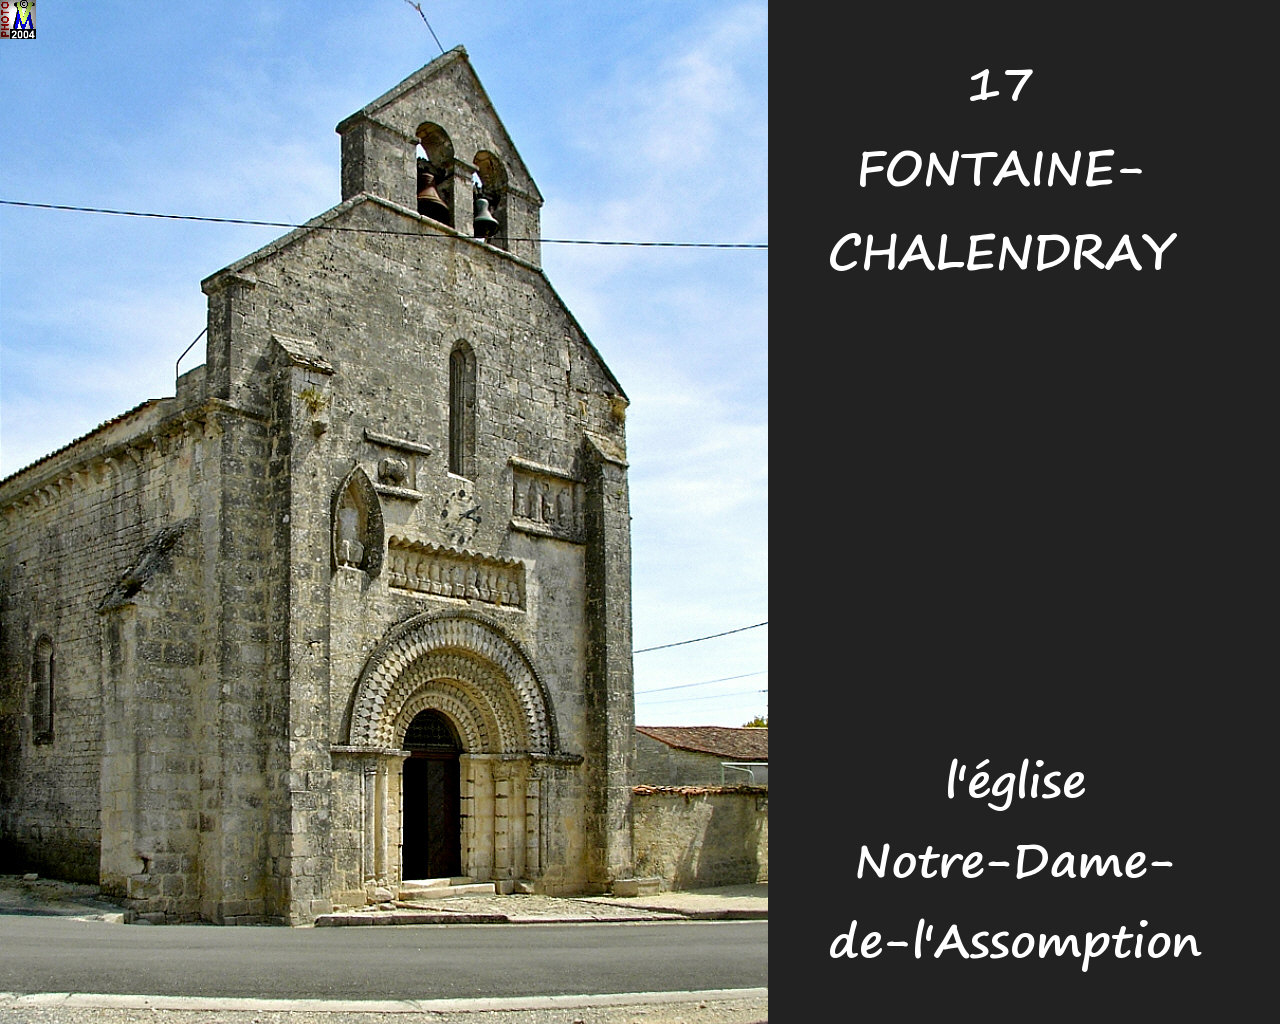 17FONTAINE-CHALENDRAY_eglise_100.jpg